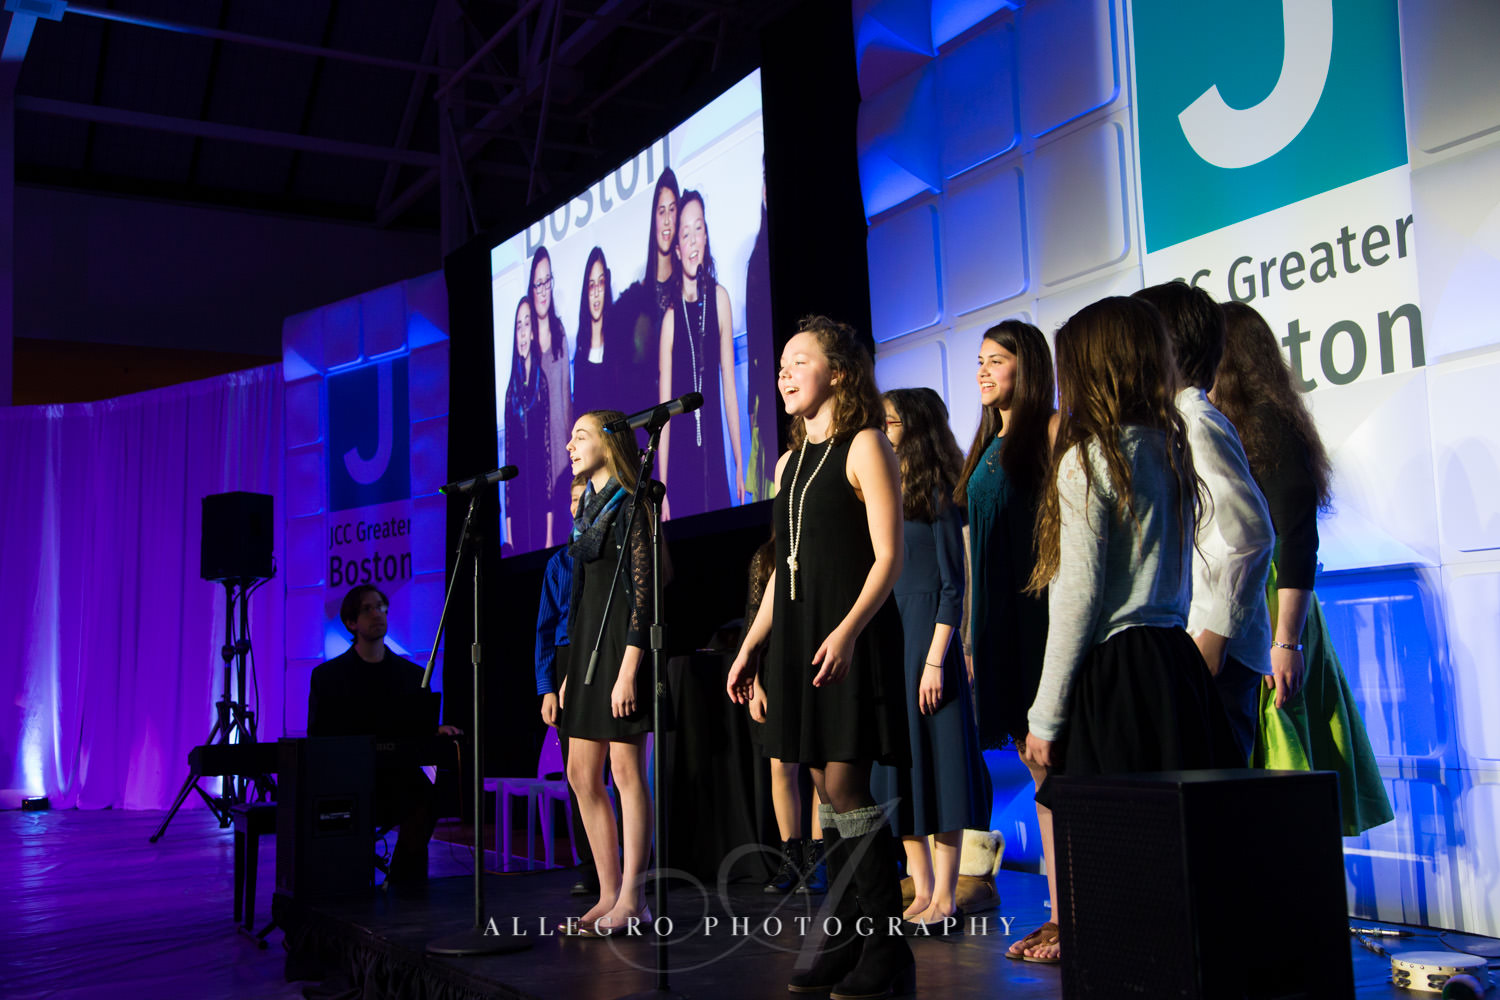 Children singing at nonprofit event photographed by Allegro Photography